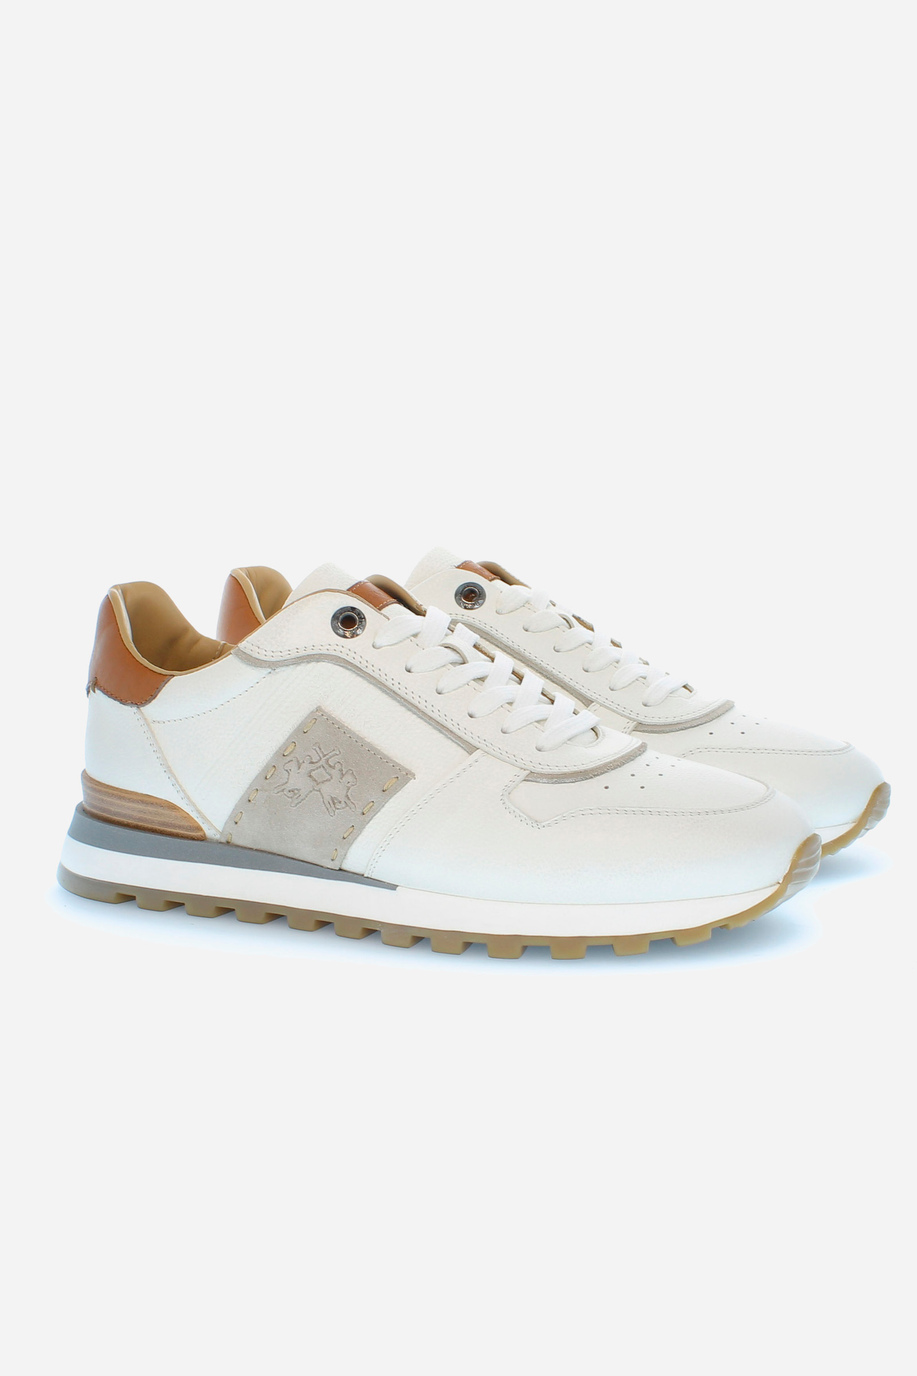 Leather trainers - Shoes and Accessories | La Martina - Official Online Shop